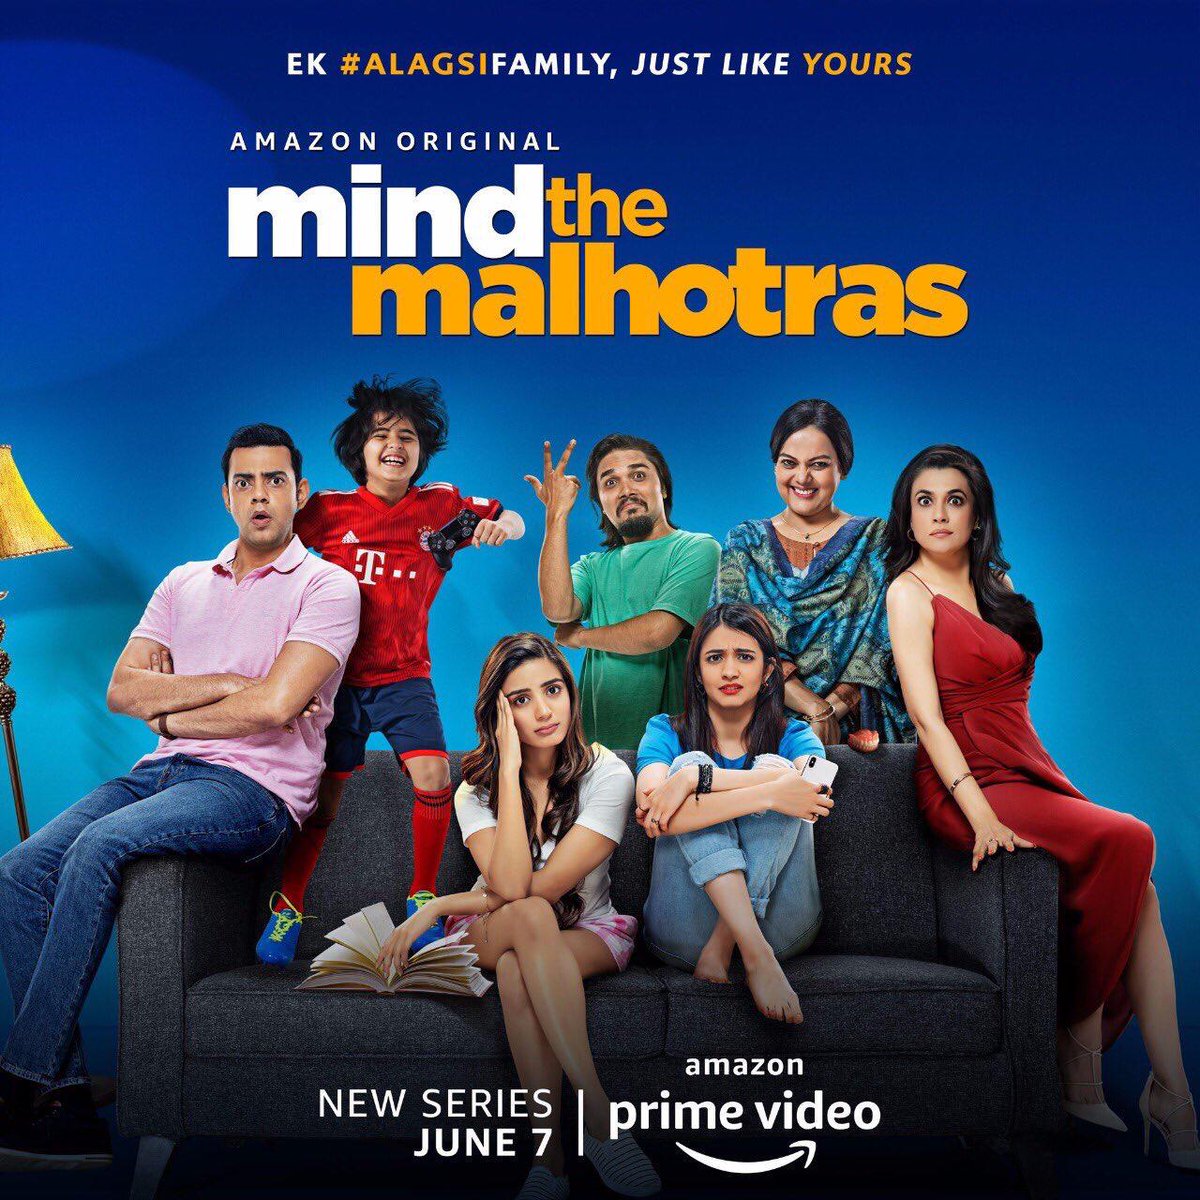 First look of @PrimeVideoIN's upcoming series #MindTheMalhotras starring @minimathur, @cyrus_sahu & @DenzilLSmith. Directed by @sahil_sangha & #AjayBhuyan. Produced by @deespeak @nairsameer. Trailer out now! Streaming from 7th June! @BornFreeEnt @ApplauseSocial #SuperCinema